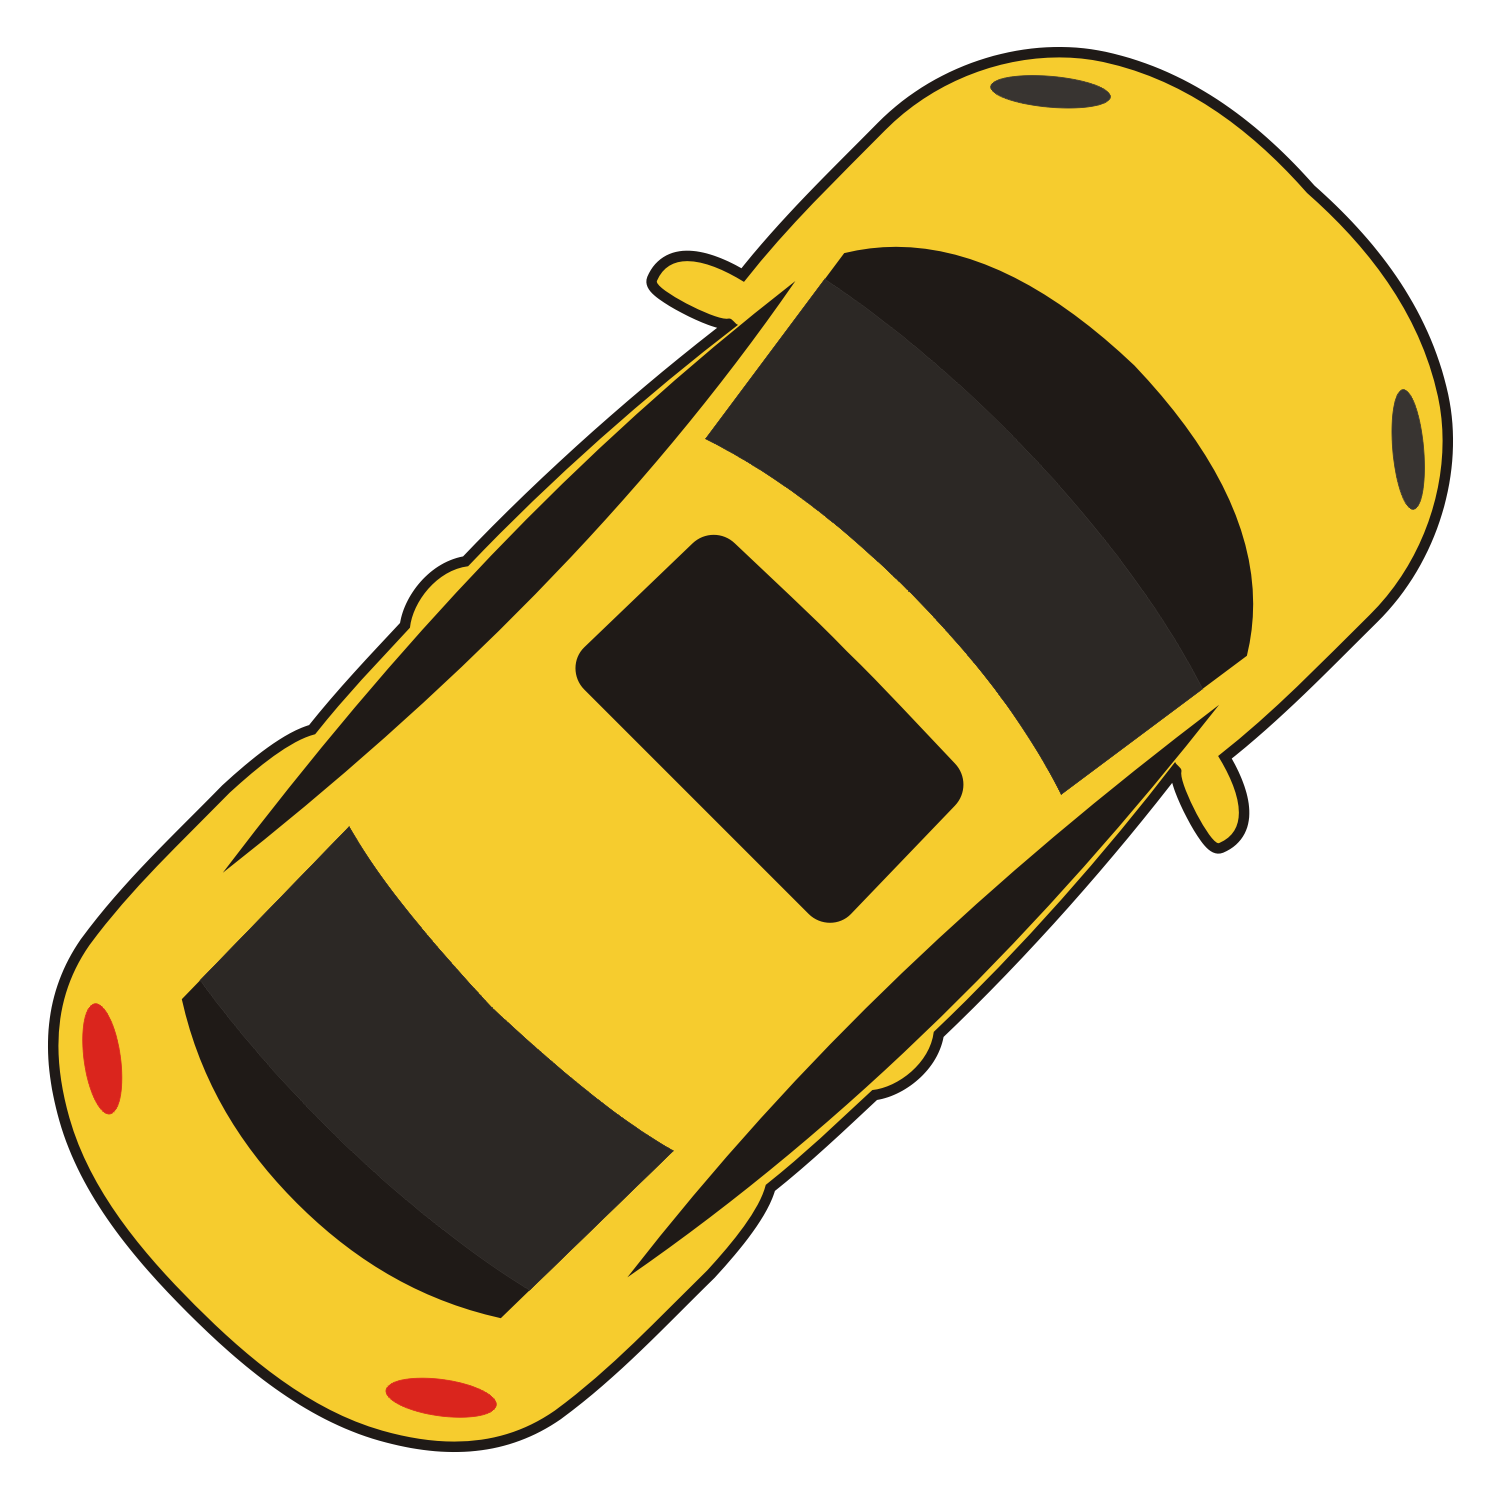 Top View Of Car Clipart Car Top View